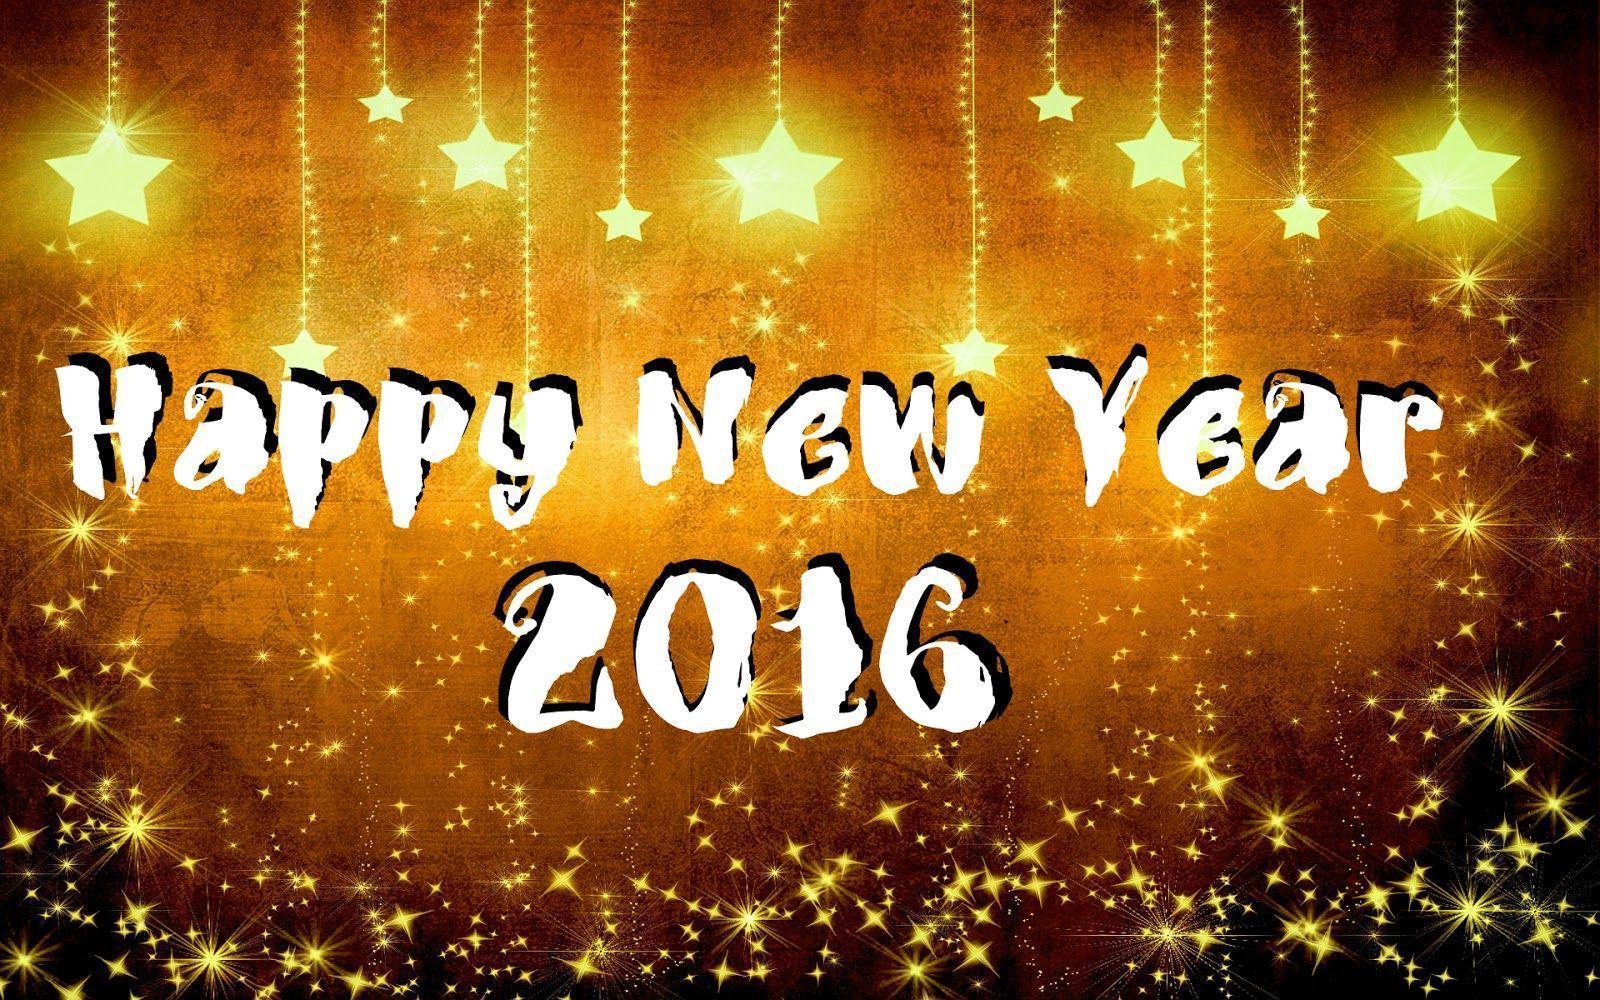 New Year 2016 Best Wallpapers